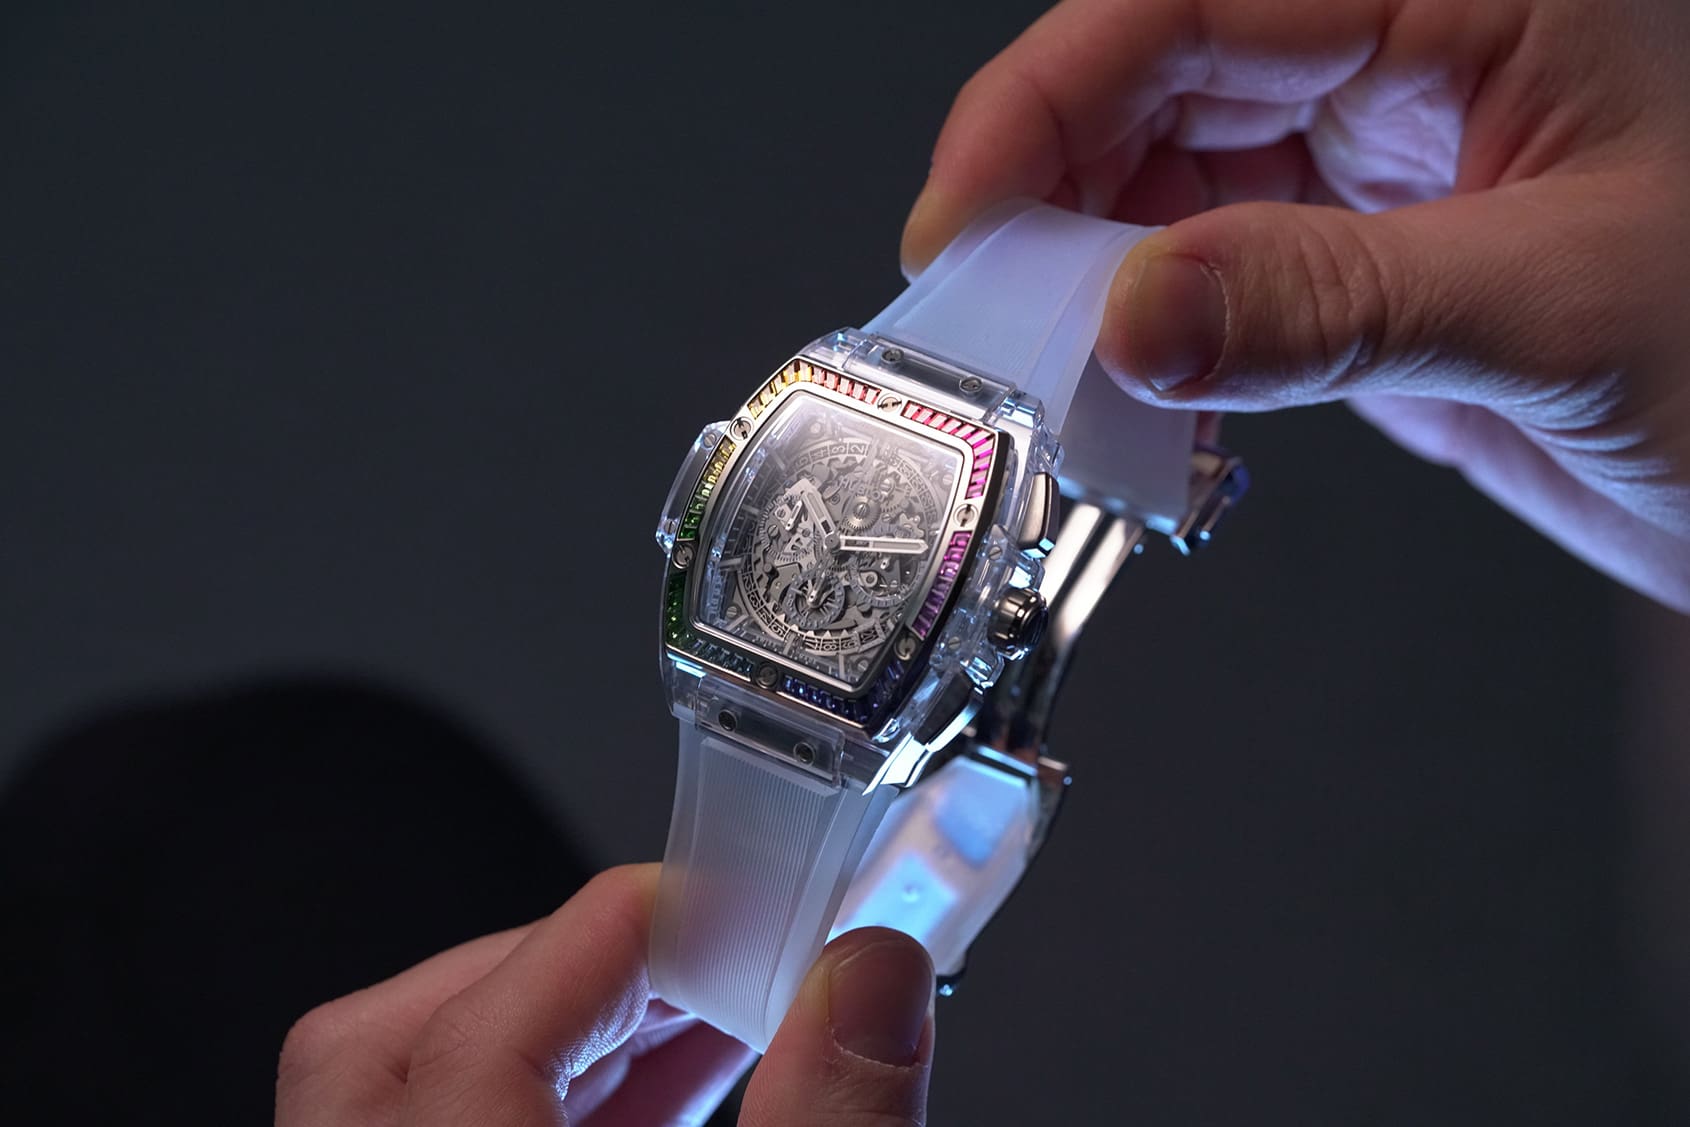 VIDEO: Not for the faint-hearted – Hublot’s Spirit of Big Bang Sapphire Rainbow